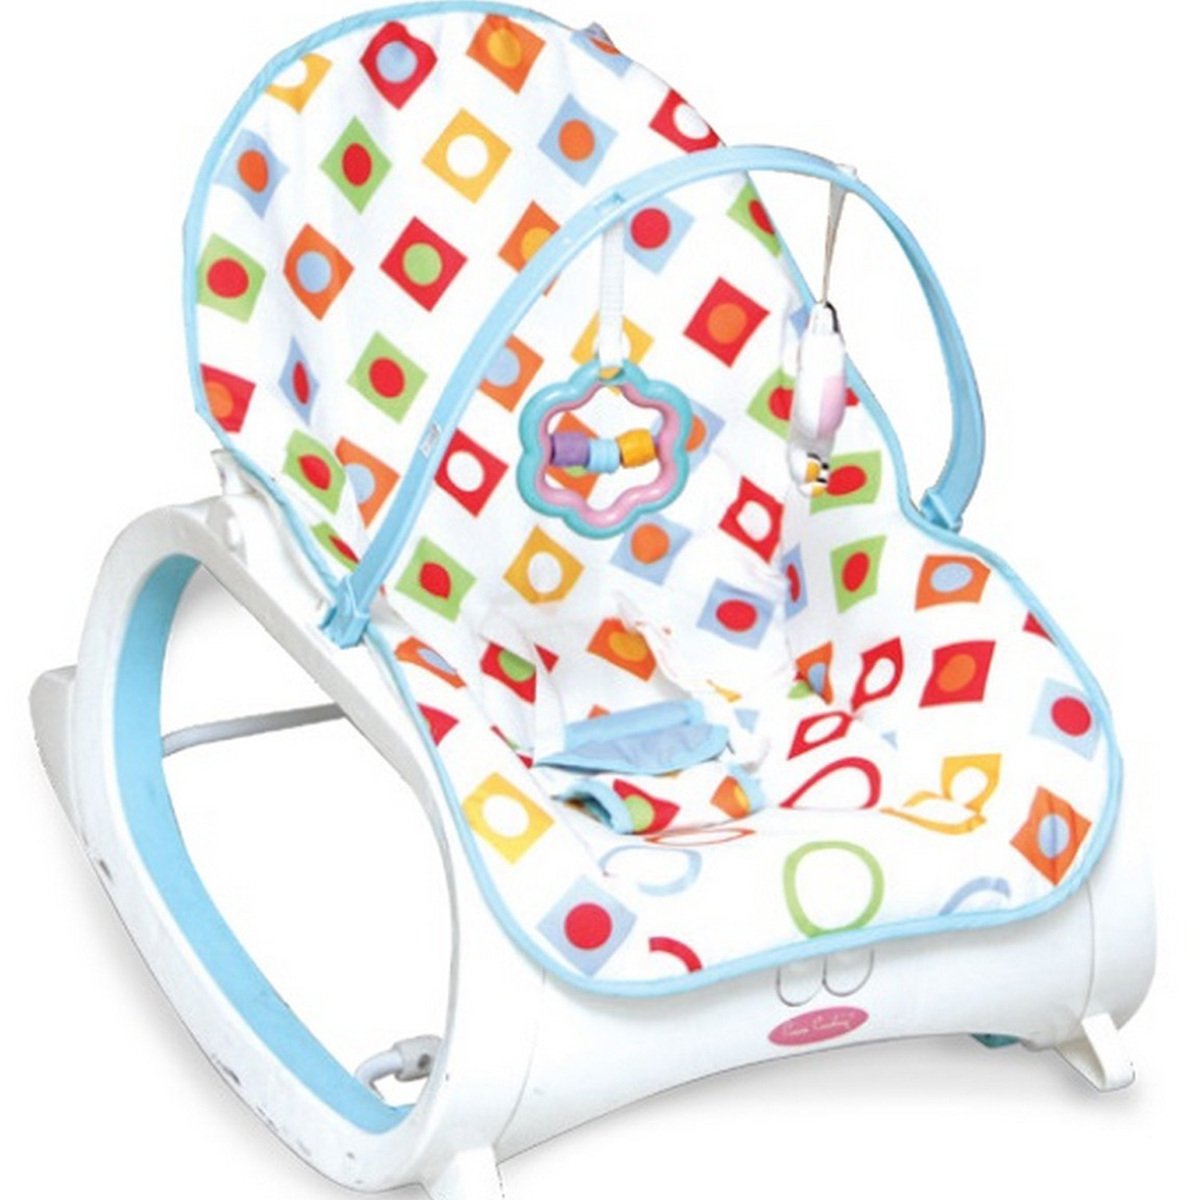 Pierre Cardin Baby Bouncer PS5201 (Color may vary)